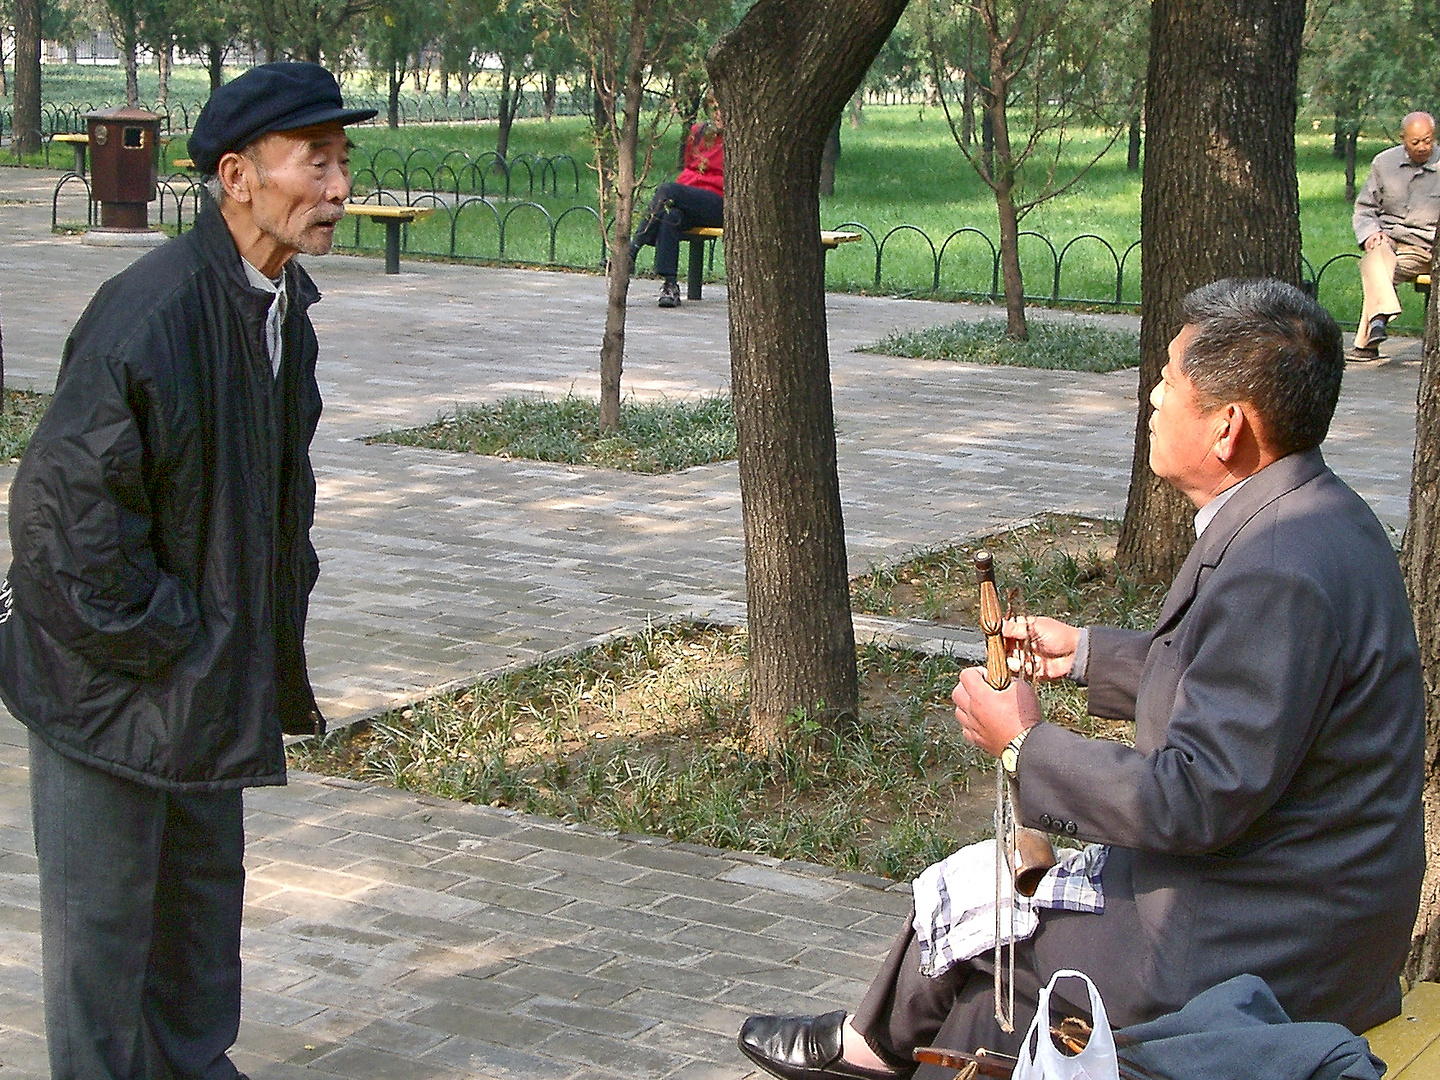 Listen to the sound of music, Bejing, China 2002